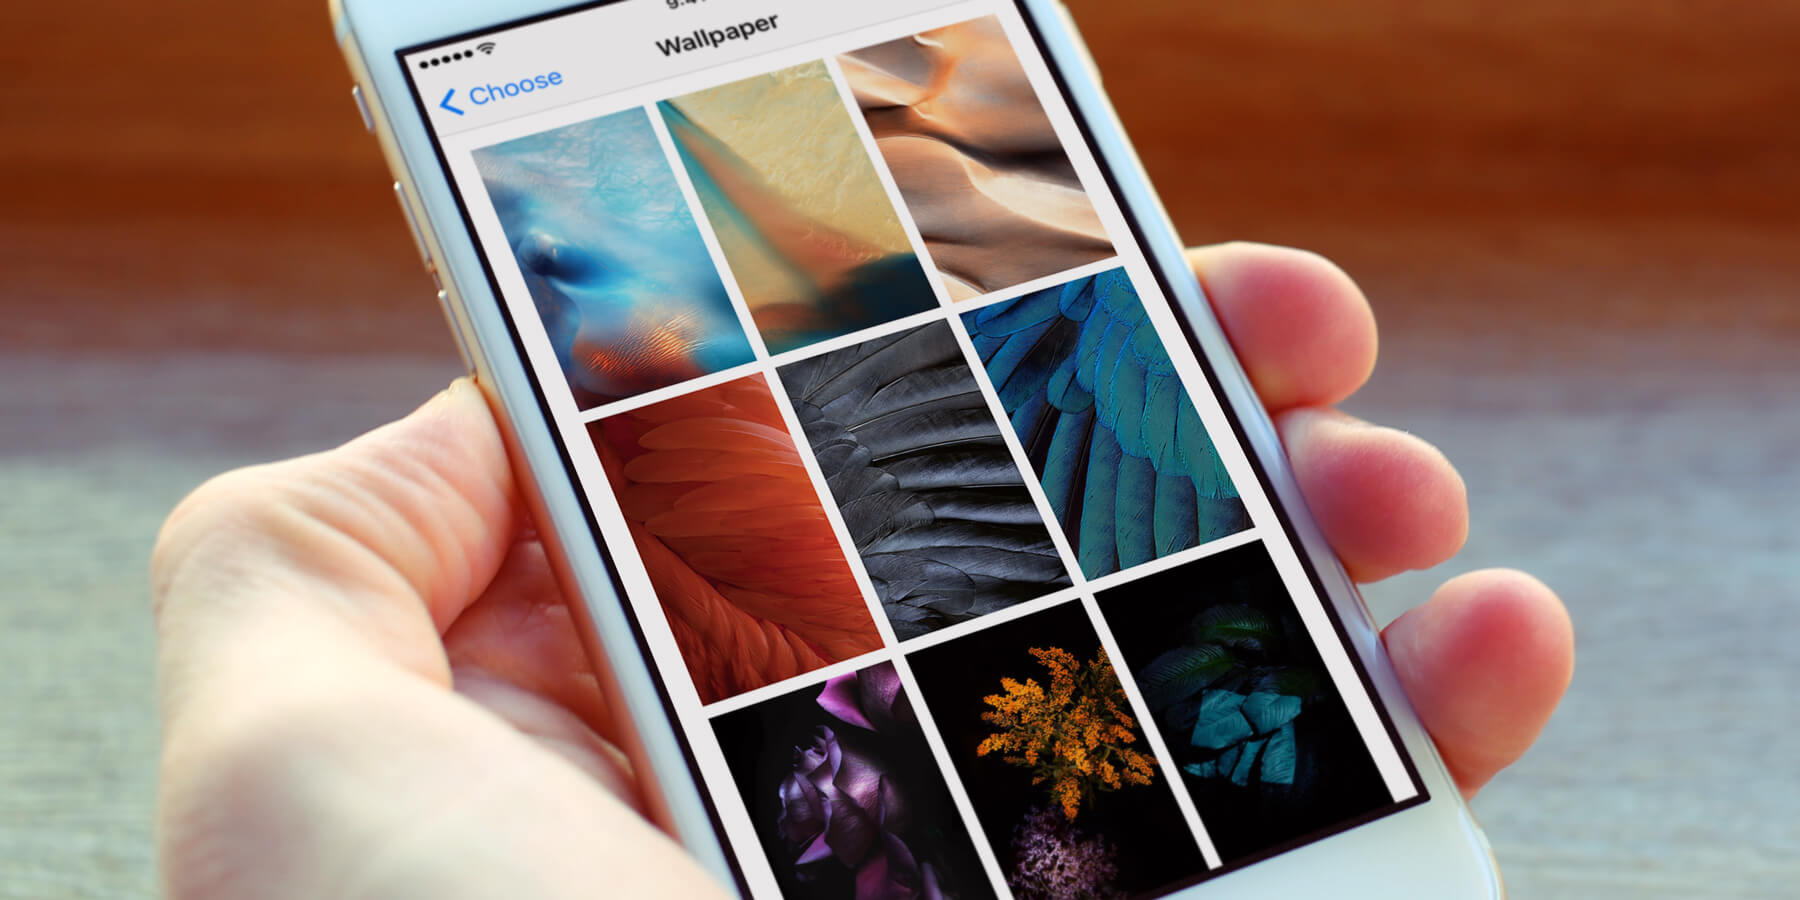 Set wallpaper: choose a new background image | iOS 11 Guide - TapSmart